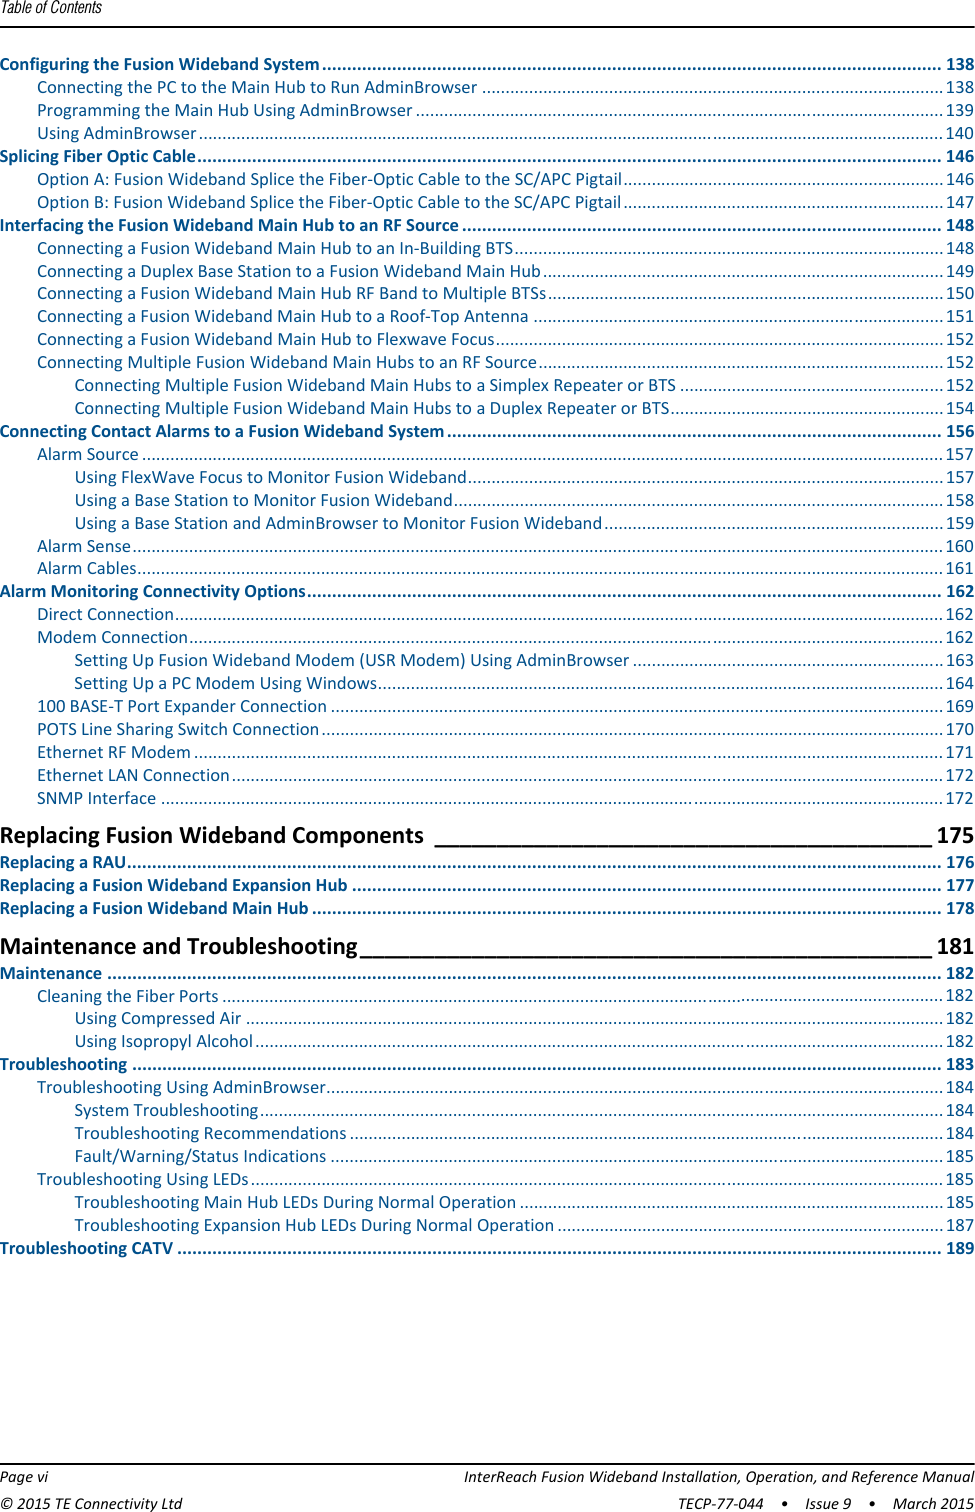 Table of Contents  Page vi InterReach Fusion Wideband Installation, Operation, and Reference Manual© 2015 TE Connectivity Ltd TECP-77-044  •  Issue 9  •  March 2015Configuring the Fusion Wideband System............................................................................................................................ 138Connecting the PC to the Main Hub to Run AdminBrowser ..................................................................................................138Programming the Main Hub Using AdminBrowser ................................................................................................................139Using AdminBrowser..............................................................................................................................................................140Splicing Fiber Optic Cable..................................................................................................................................................... 146Option A: Fusion Wideband Splice the Fiber-Optic Cable to the SC/APC Pigtail....................................................................146Option B: Fusion Wideband Splice the Fiber-Optic Cable to the SC/APC Pigtail....................................................................147Interfacing the Fusion Wideband Main Hub to an RF Source ................................................................................................ 148Connecting a Fusion Wideband Main Hub to an In-Building BTS...........................................................................................148Connecting a Duplex Base Station to a Fusion Wideband Main Hub.....................................................................................149Connecting a Fusion Wideband Main Hub RF Band to Multiple BTSs....................................................................................150Connecting a Fusion Wideband Main Hub to a Roof-Top Antenna .......................................................................................151Connecting a Fusion Wideband Main Hub to Flexwave Focus...............................................................................................152Connecting Multiple Fusion Wideband Main Hubs to an RF Source......................................................................................152Connecting Multiple Fusion Wideband Main Hubs to a Simplex Repeater or BTS ........................................................ 152Connecting Multiple Fusion Wideband Main Hubs to a Duplex Repeater or BTS..........................................................154Connecting Contact Alarms to a Fusion Wideband System................................................................................................... 156Alarm Source ..........................................................................................................................................................................157Using FlexWave Focus to Monitor Fusion Wideband.....................................................................................................157Using a Base Station to Monitor Fusion Wideband........................................................................................................158Using a Base Station and AdminBrowser to Monitor Fusion Wideband........................................................................ 159Alarm Sense............................................................................................................................................................................160Alarm Cables...........................................................................................................................................................................161Alarm Monitoring Connectivity Options............................................................................................................................... 162Direct Connection...................................................................................................................................................................162Modem Connection................................................................................................................................................................162Setting Up Fusion Wideband Modem (USR Modem) Using AdminBrowser .................................................................. 163Setting Up a PC Modem Using Windows........................................................................................................................164100 BASE-T Port Expander Connection ..................................................................................................................................169POTS Line Sharing Switch Connection....................................................................................................................................170Ethernet RF Modem ...............................................................................................................................................................171Ethernet LAN Connection.......................................................................................................................................................172SNMP Interface ......................................................................................................................................................................172Replacing Fusion Wideband Components ________________________________________ 175Replacing a RAU................................................................................................................................................................... 176Replacing a Fusion Wideband Expansion Hub ...................................................................................................................... 177Replacing a Fusion Wideband Main Hub .............................................................................................................................. 178Maintenance and Troubleshooting______________________________________________ 181Maintenance ....................................................................................................................................................................... 182Cleaning the Fiber Ports .........................................................................................................................................................182Using Compressed Air ....................................................................................................................................................182Using Isopropyl Alcohol..................................................................................................................................................182Troubleshooting .................................................................................................................................................................. 183Troubleshooting Using AdminBrowser...................................................................................................................................184System Troubleshooting.................................................................................................................................................184Troubleshooting Recommendations ..............................................................................................................................184Fault/Warning/Status Indications ..................................................................................................................................185Troubleshooting Using LEDs...................................................................................................................................................185Troubleshooting Main Hub LEDs During Normal Operation ..........................................................................................185Troubleshooting Expansion Hub LEDs During Normal Operation ..................................................................................187Troubleshooting CATV ......................................................................................................................................................... 189